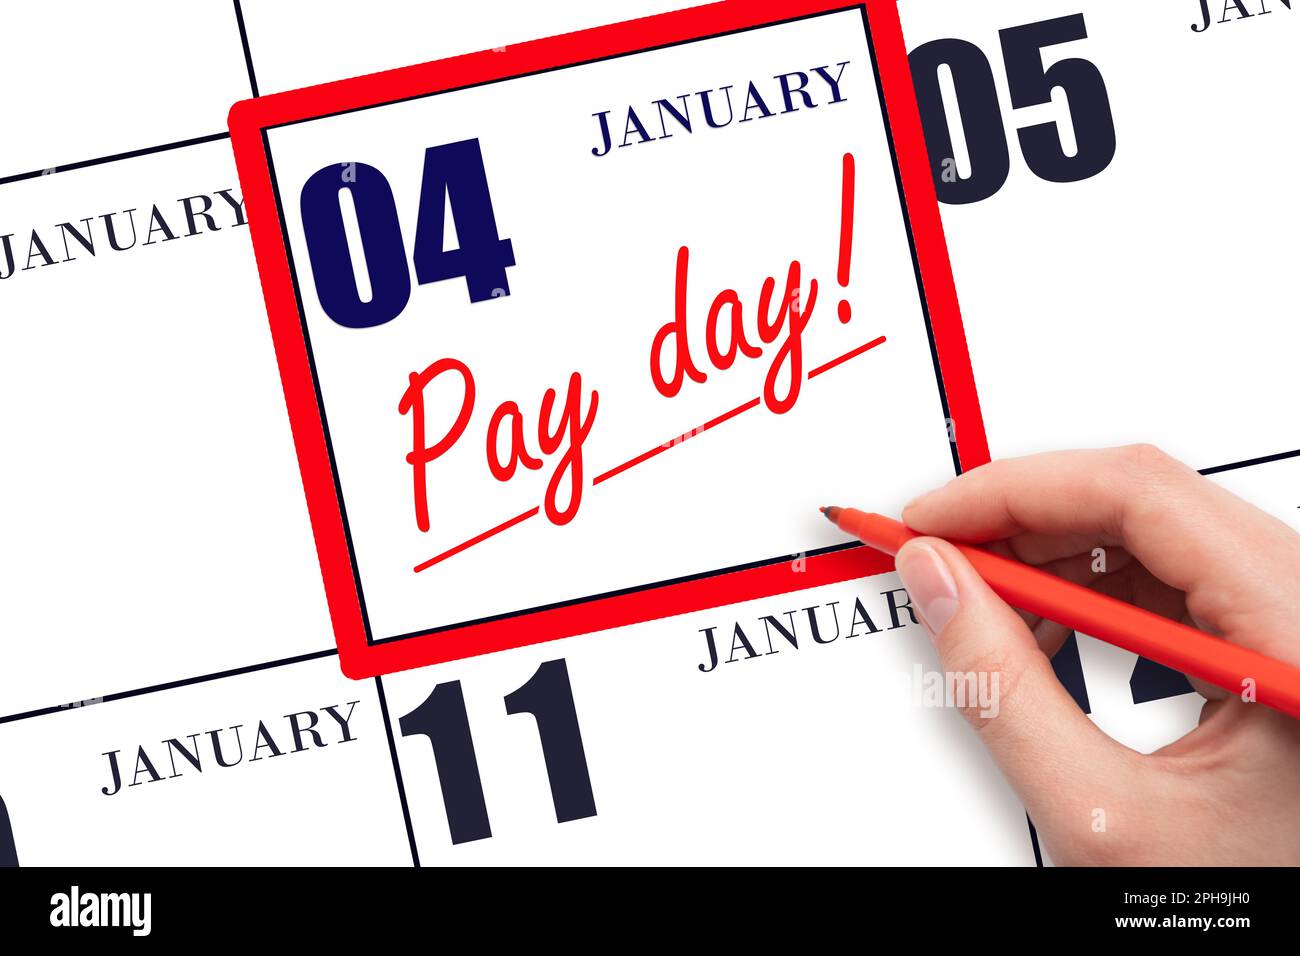 4th day of January. Hand writing text PAY DATE on calendar date January 4 and underline it. Payment due date.  Reminder concept of payment. Winter mon Stock Photo